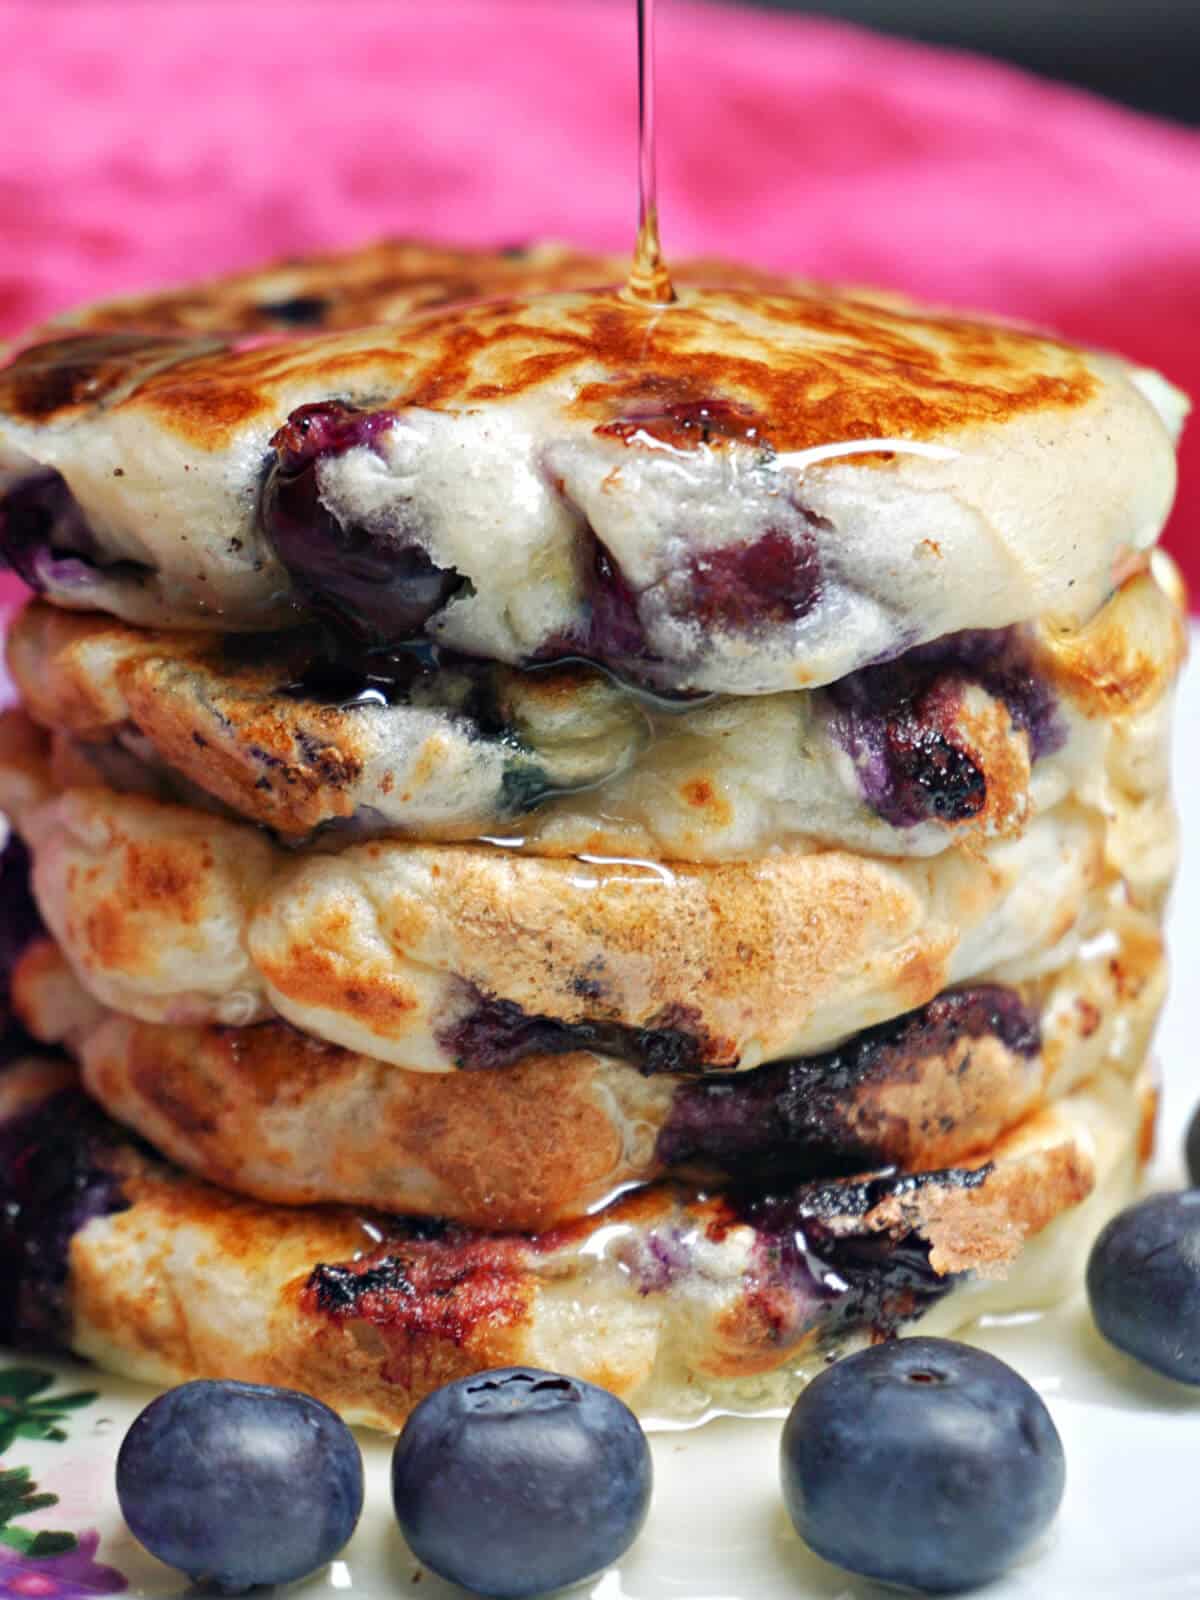 A pile of blueberry pancakes being drizzled with maple syrup.